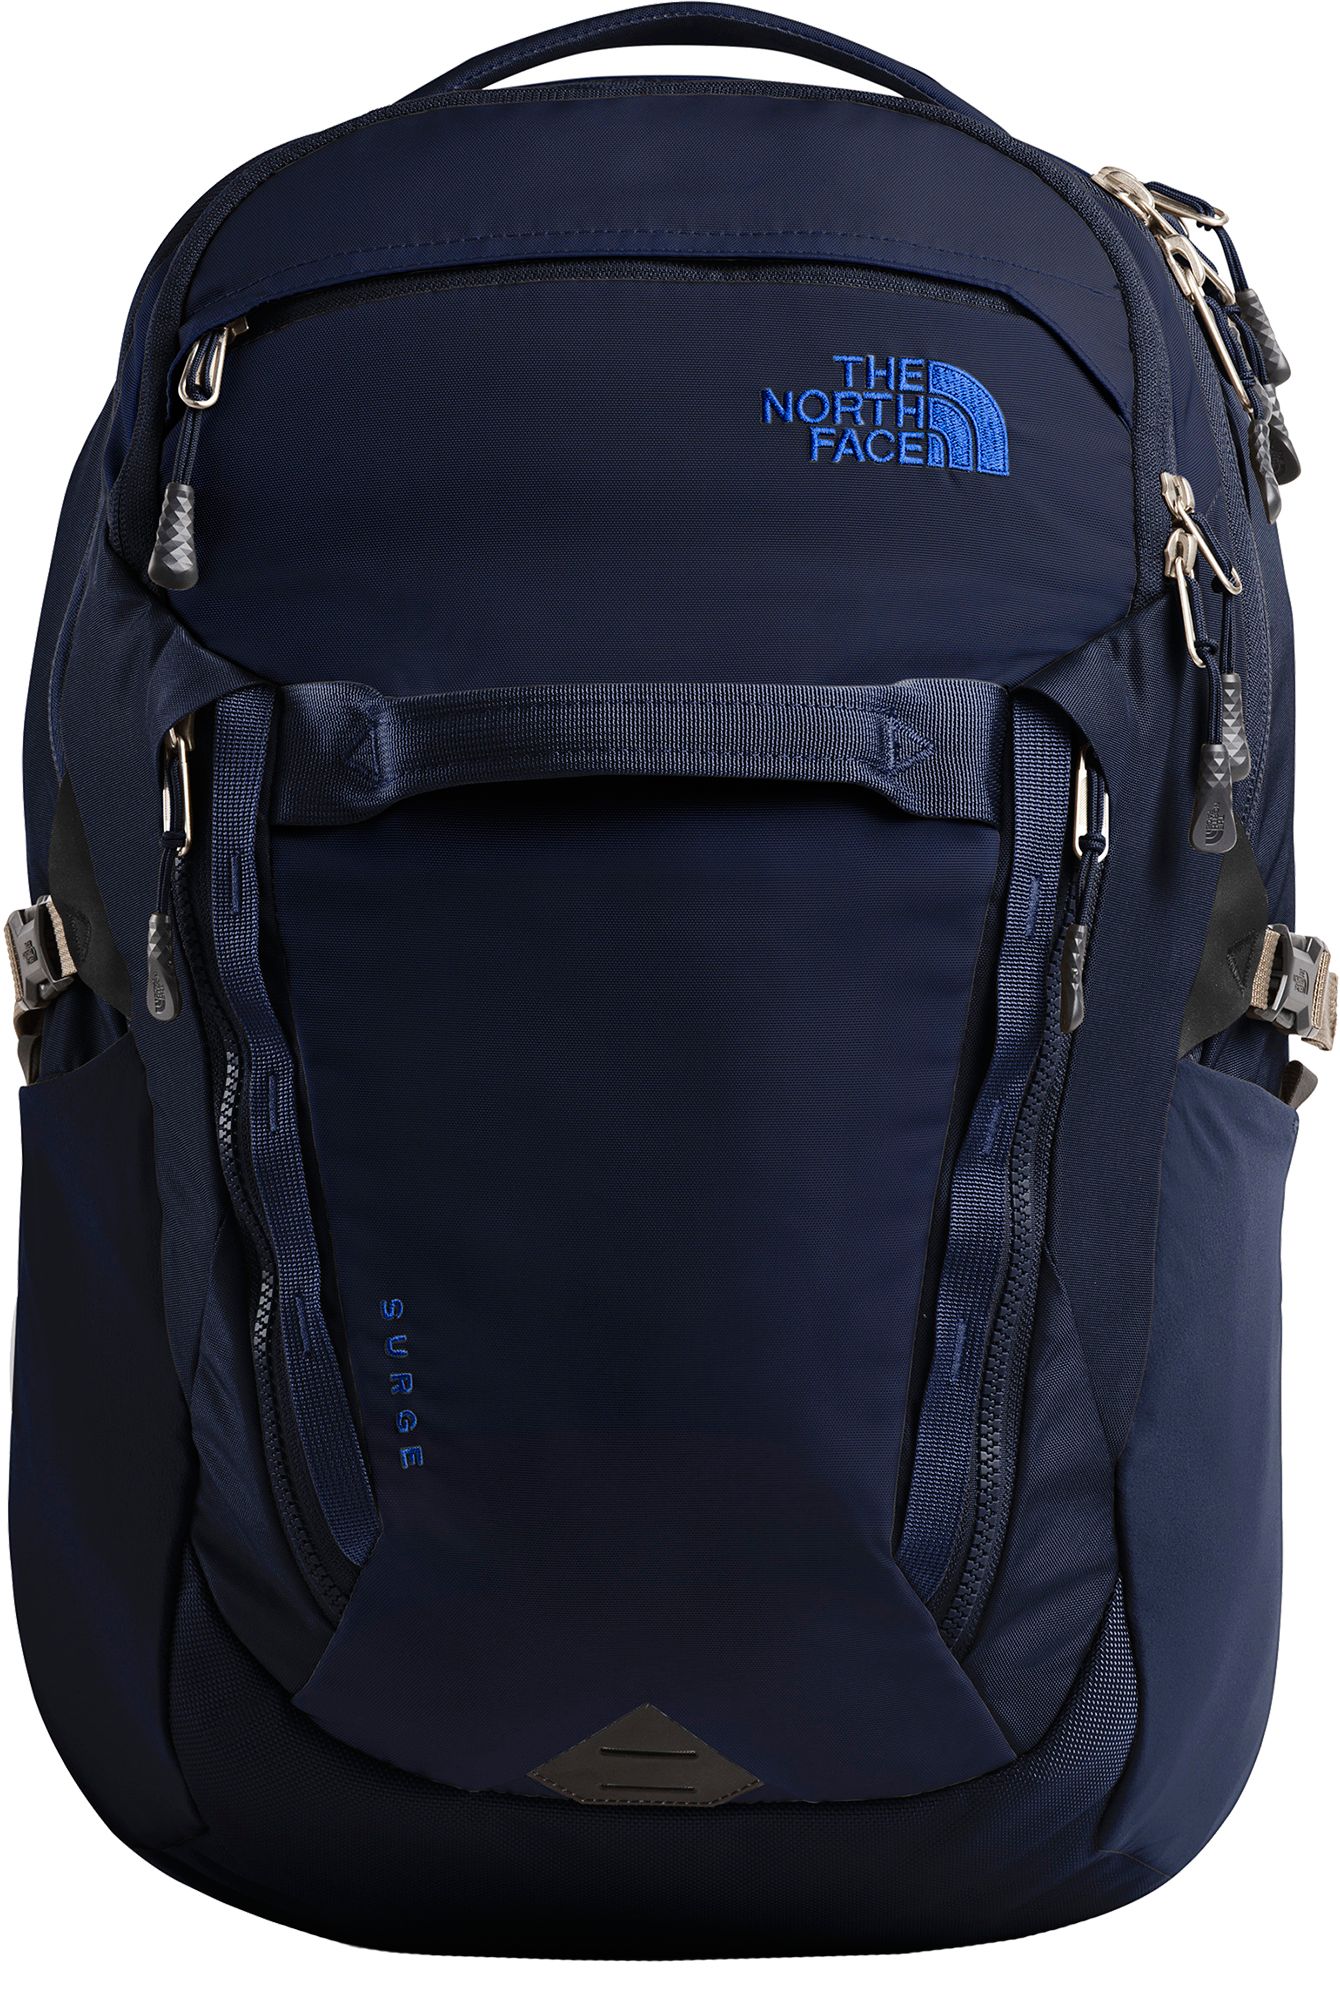 The North Face Men's Surge 18 Backpack 